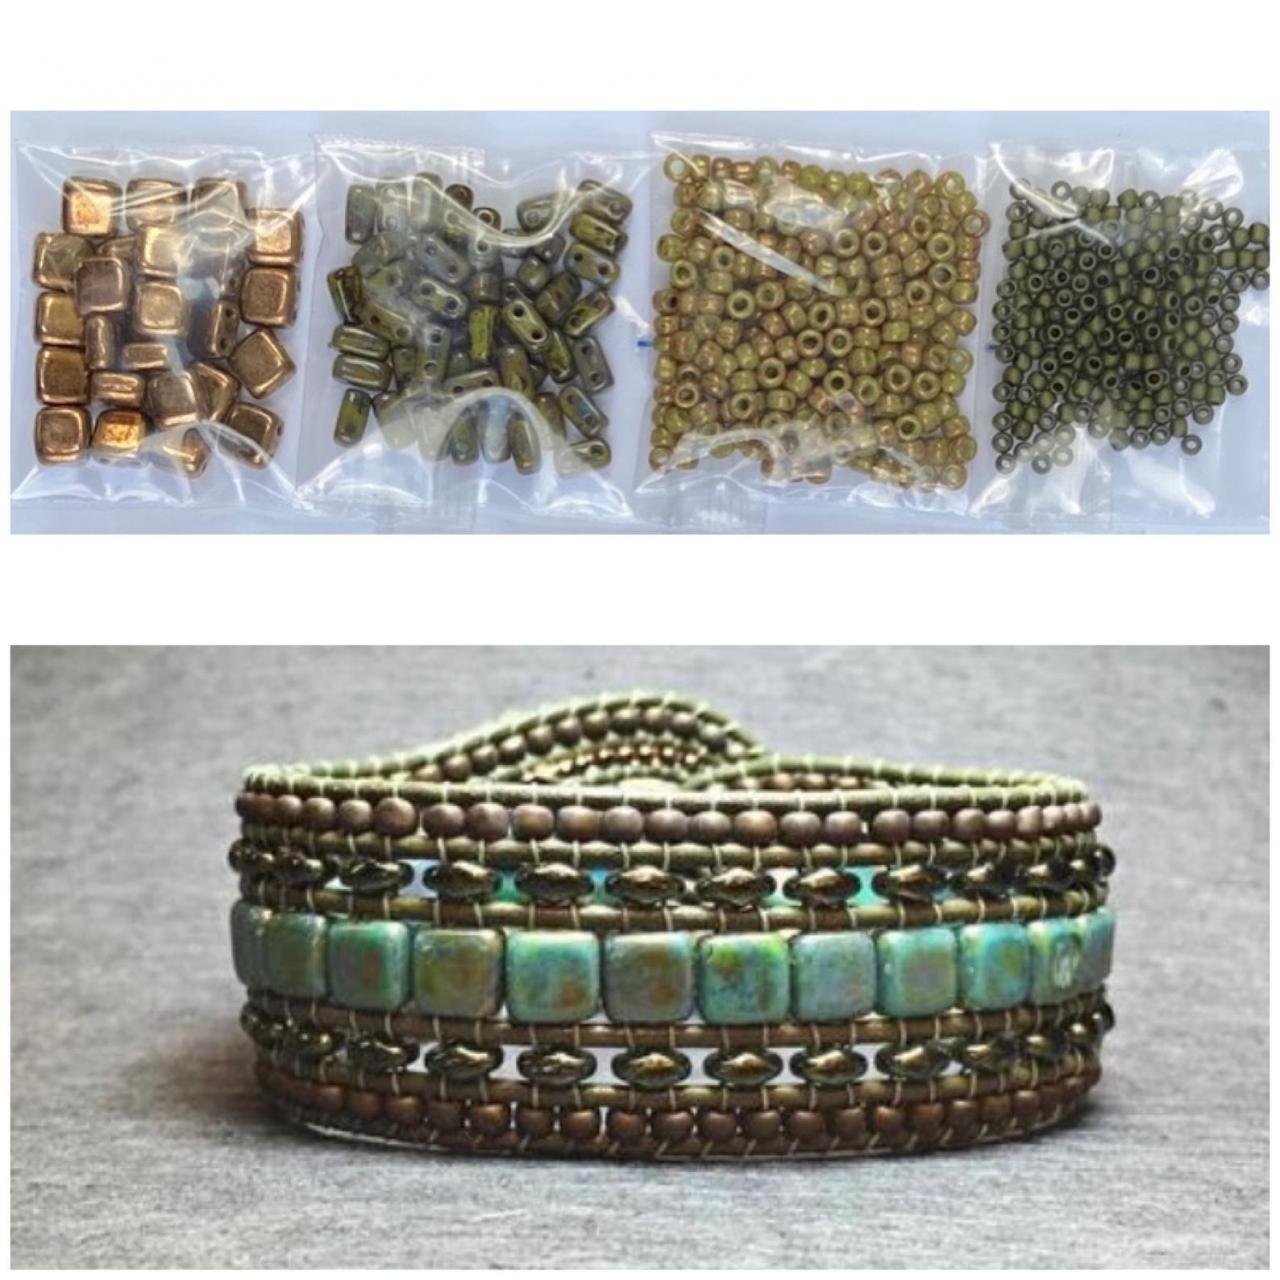 KIT Wide Leather Beaded Cuff Kit by Leila Martin Bonny Bohemian Olive Picasso Bronze DIY Intermediate Instructions Complete NO Tools #11